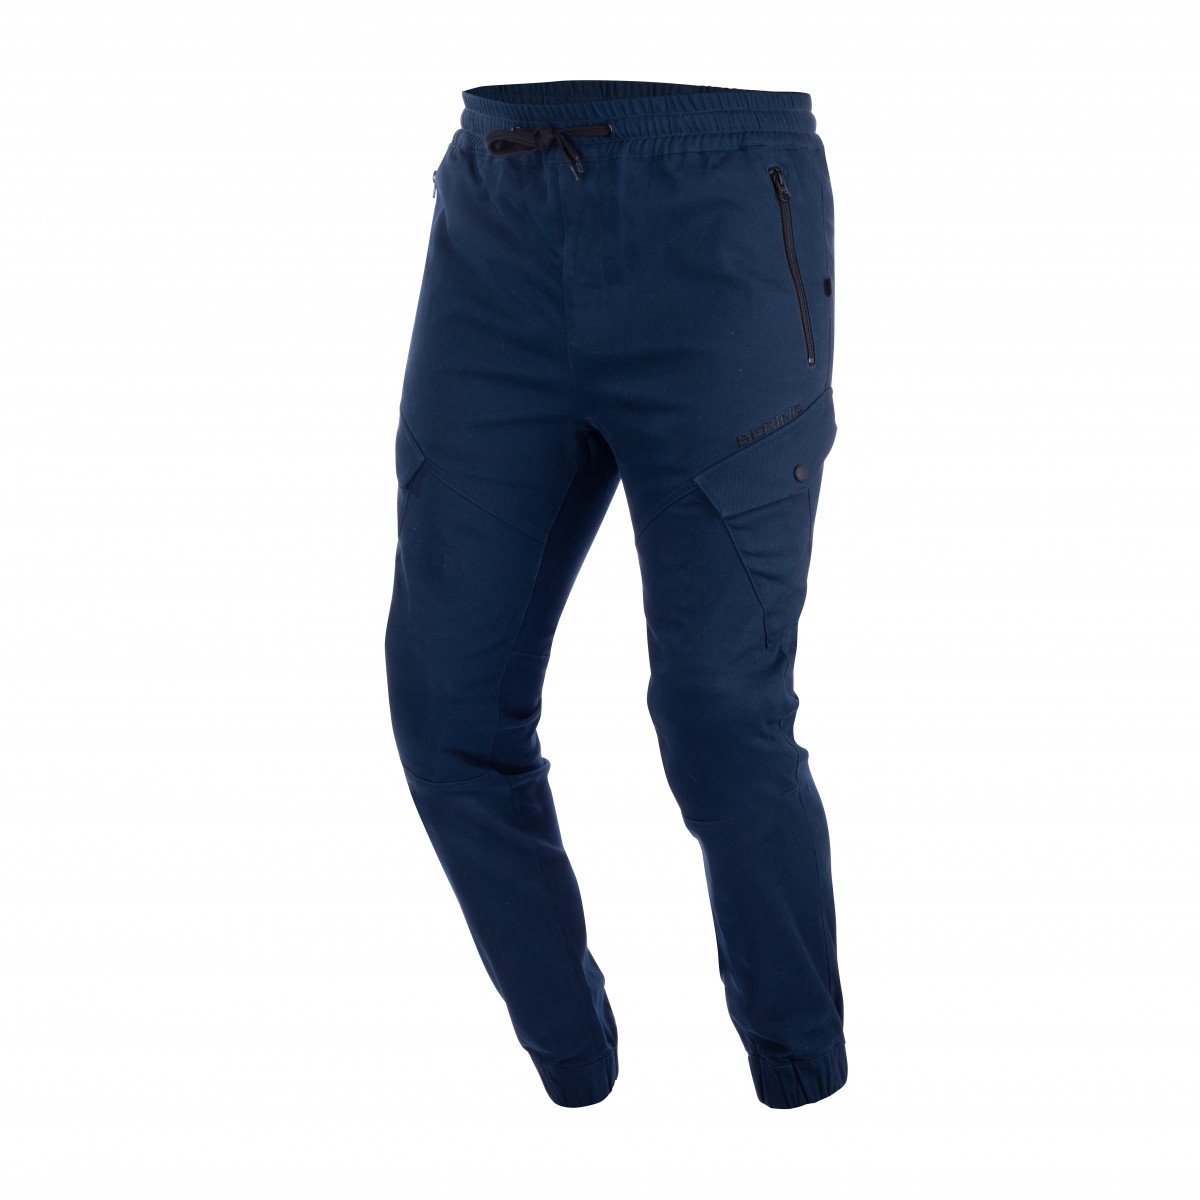 Image of Bering Trousers Richie Navy Blue Size 3XL ID 3660815167830